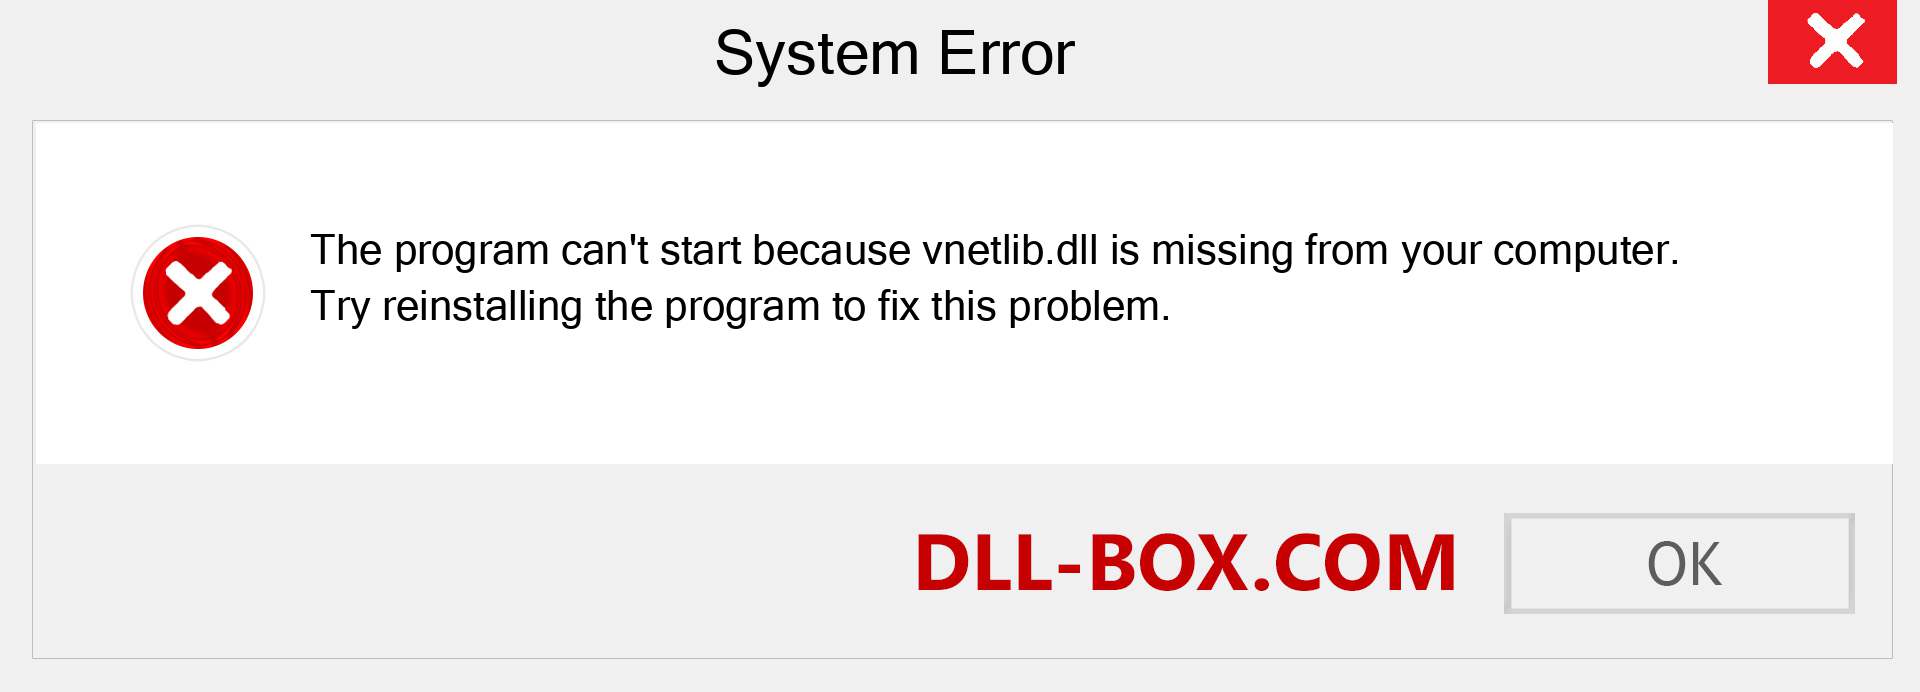  vnetlib.dll file is missing?. Download for Windows 7, 8, 10 - Fix  vnetlib dll Missing Error on Windows, photos, images